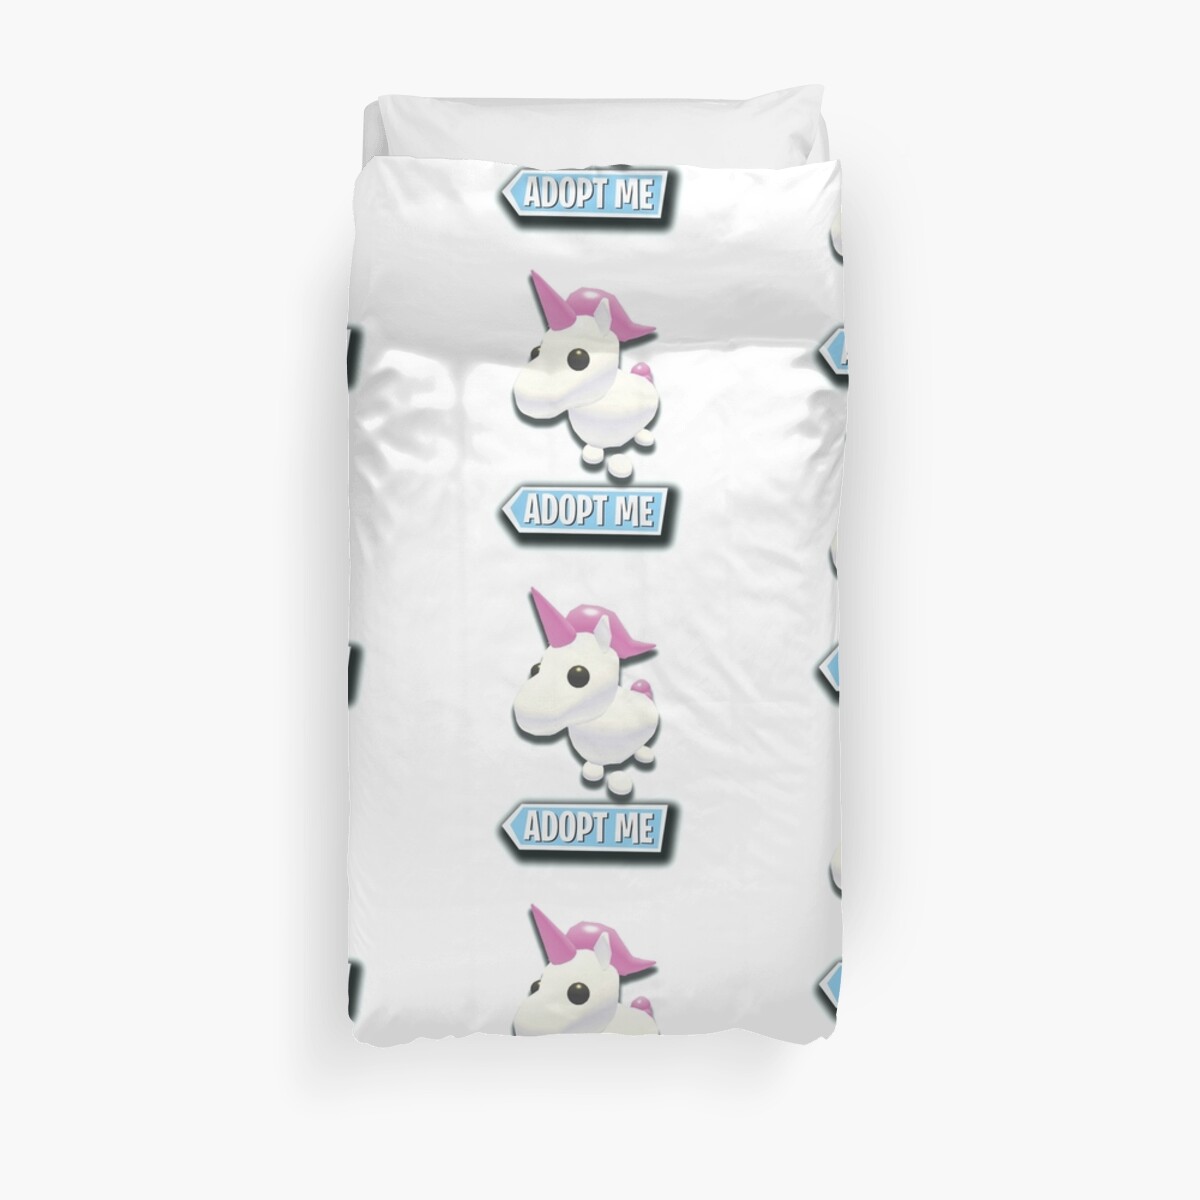 Unicorn Adopt Me Roblox Roblox Game Adopt Me Characters Duvet Cover By Affwebmm Redbubble - roblox unicorn character